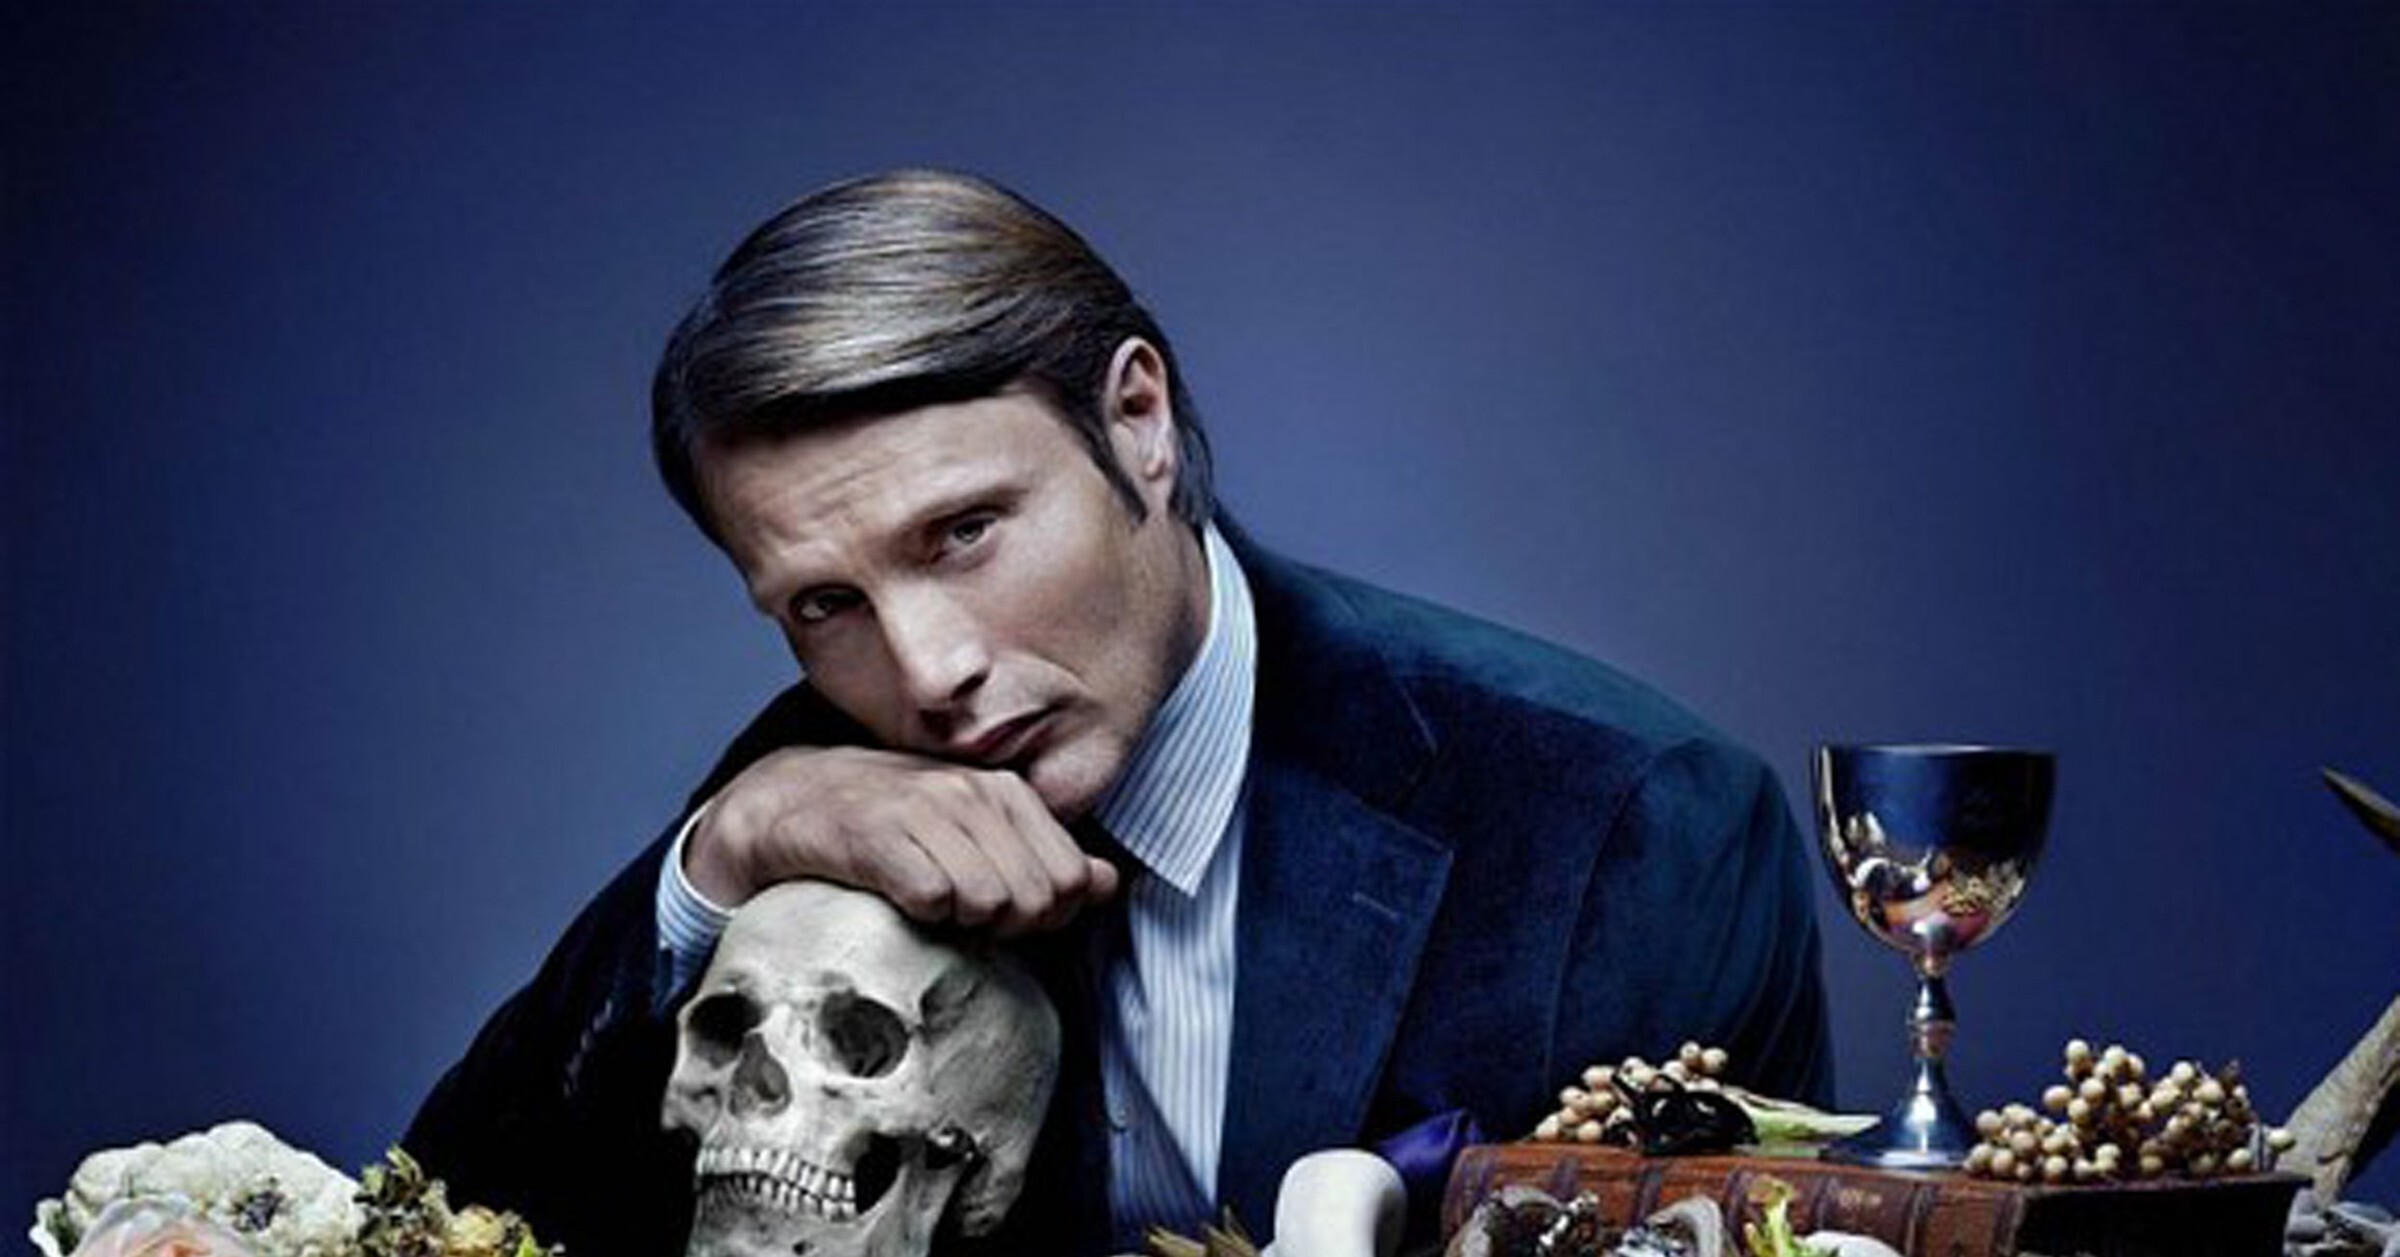 will-hannibal-be-renewed-for-season-4-by-netflix-what-we-know-film